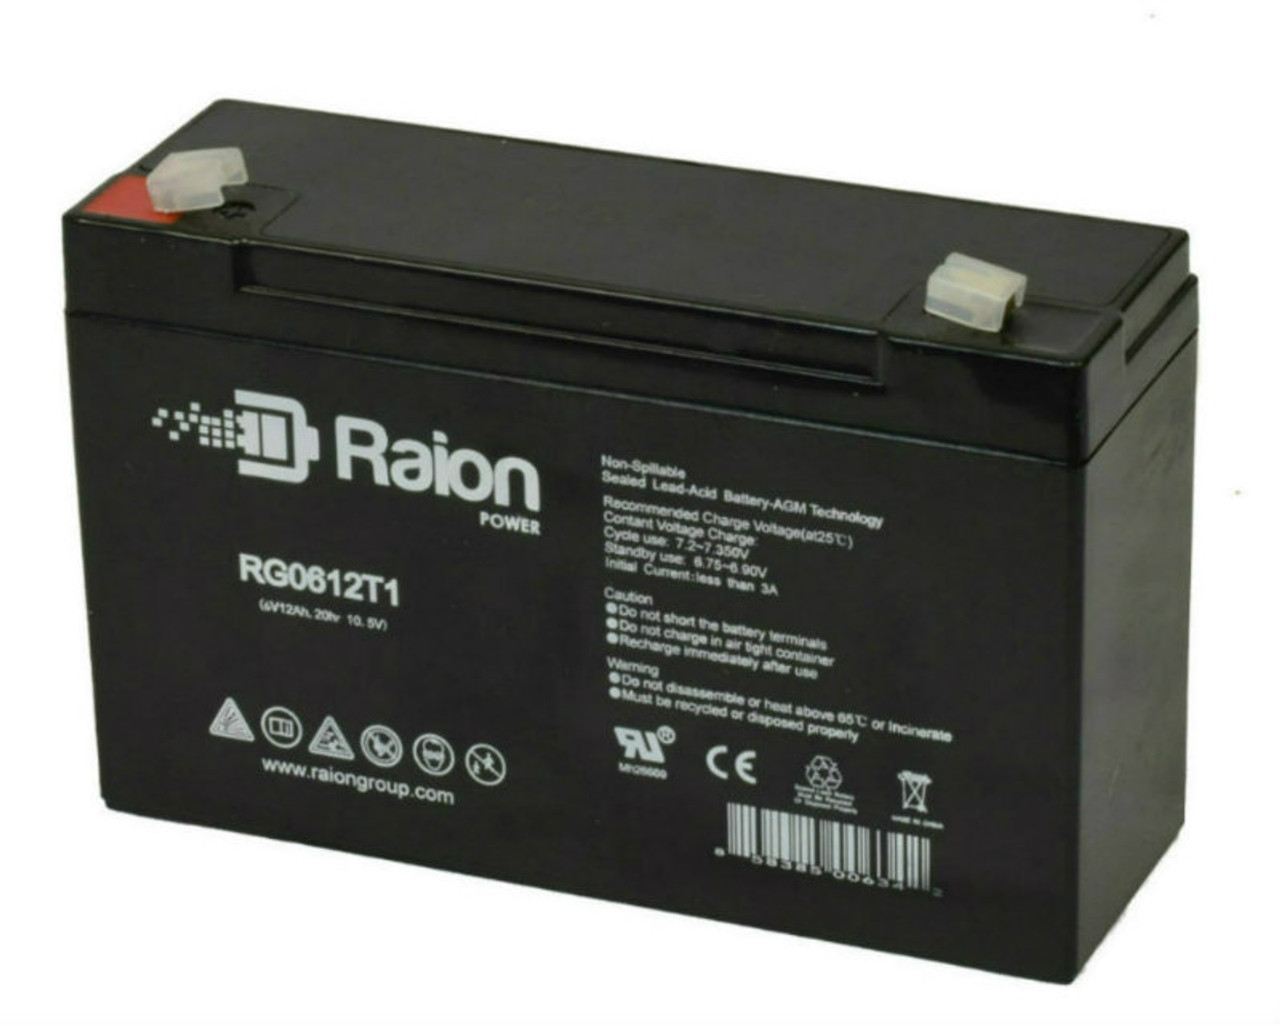 Raion Power RG06120T1 Replacement Battery for Saft BB1280C